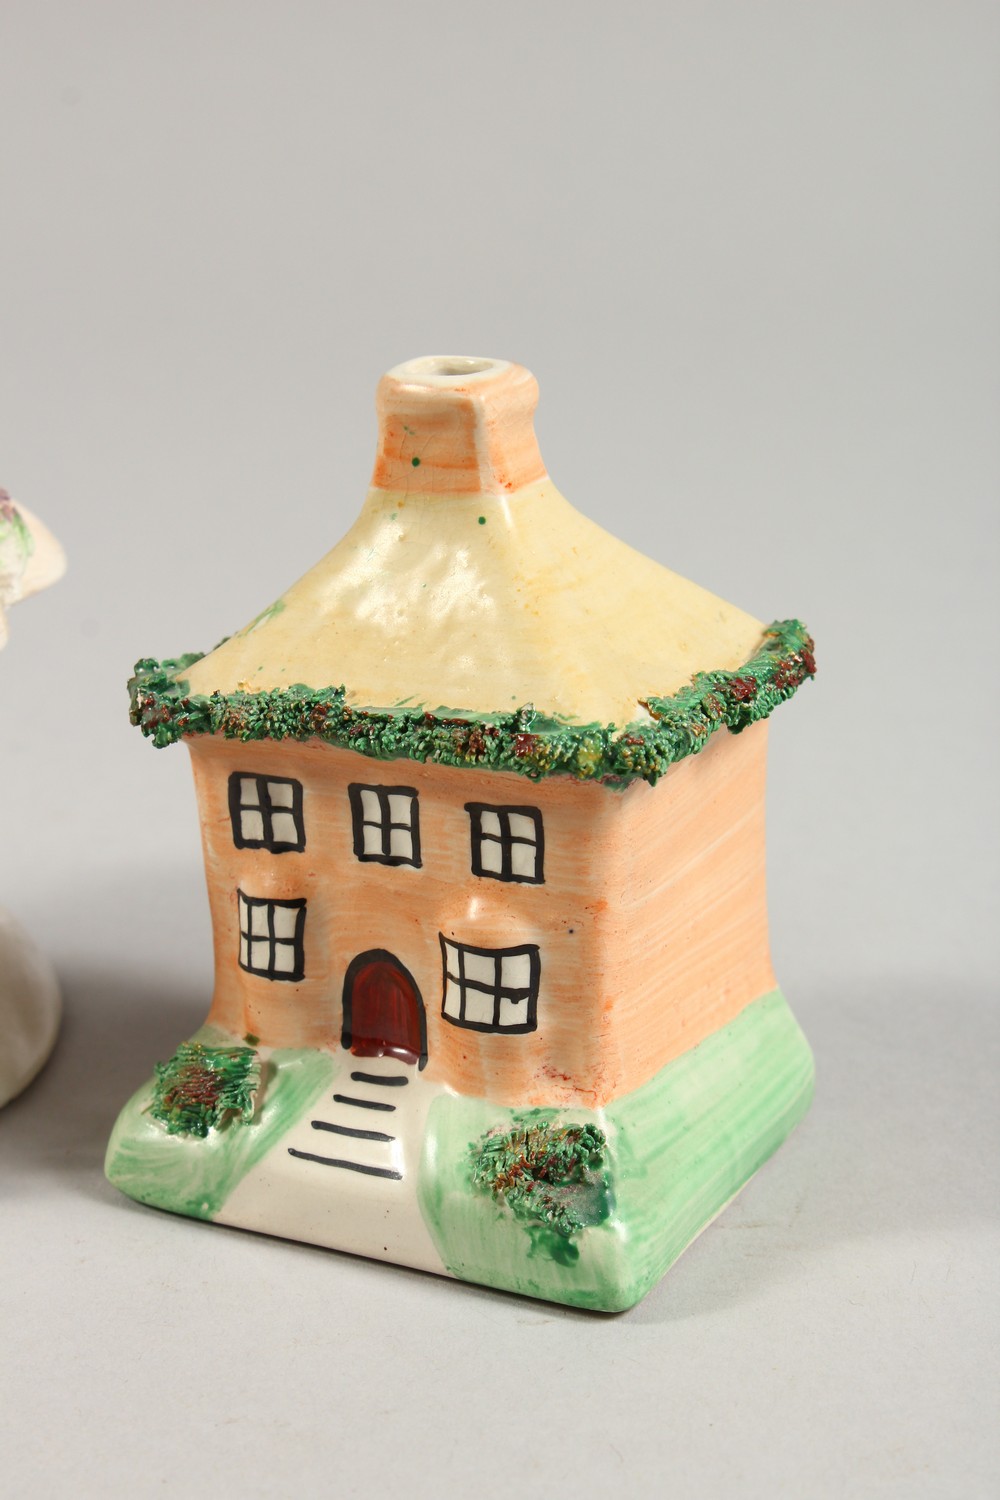 FOUR SMALL 19TH CENTURY STAFFORDSHIRE PASTILLE BURNER COTTAGES. - Image 2 of 6